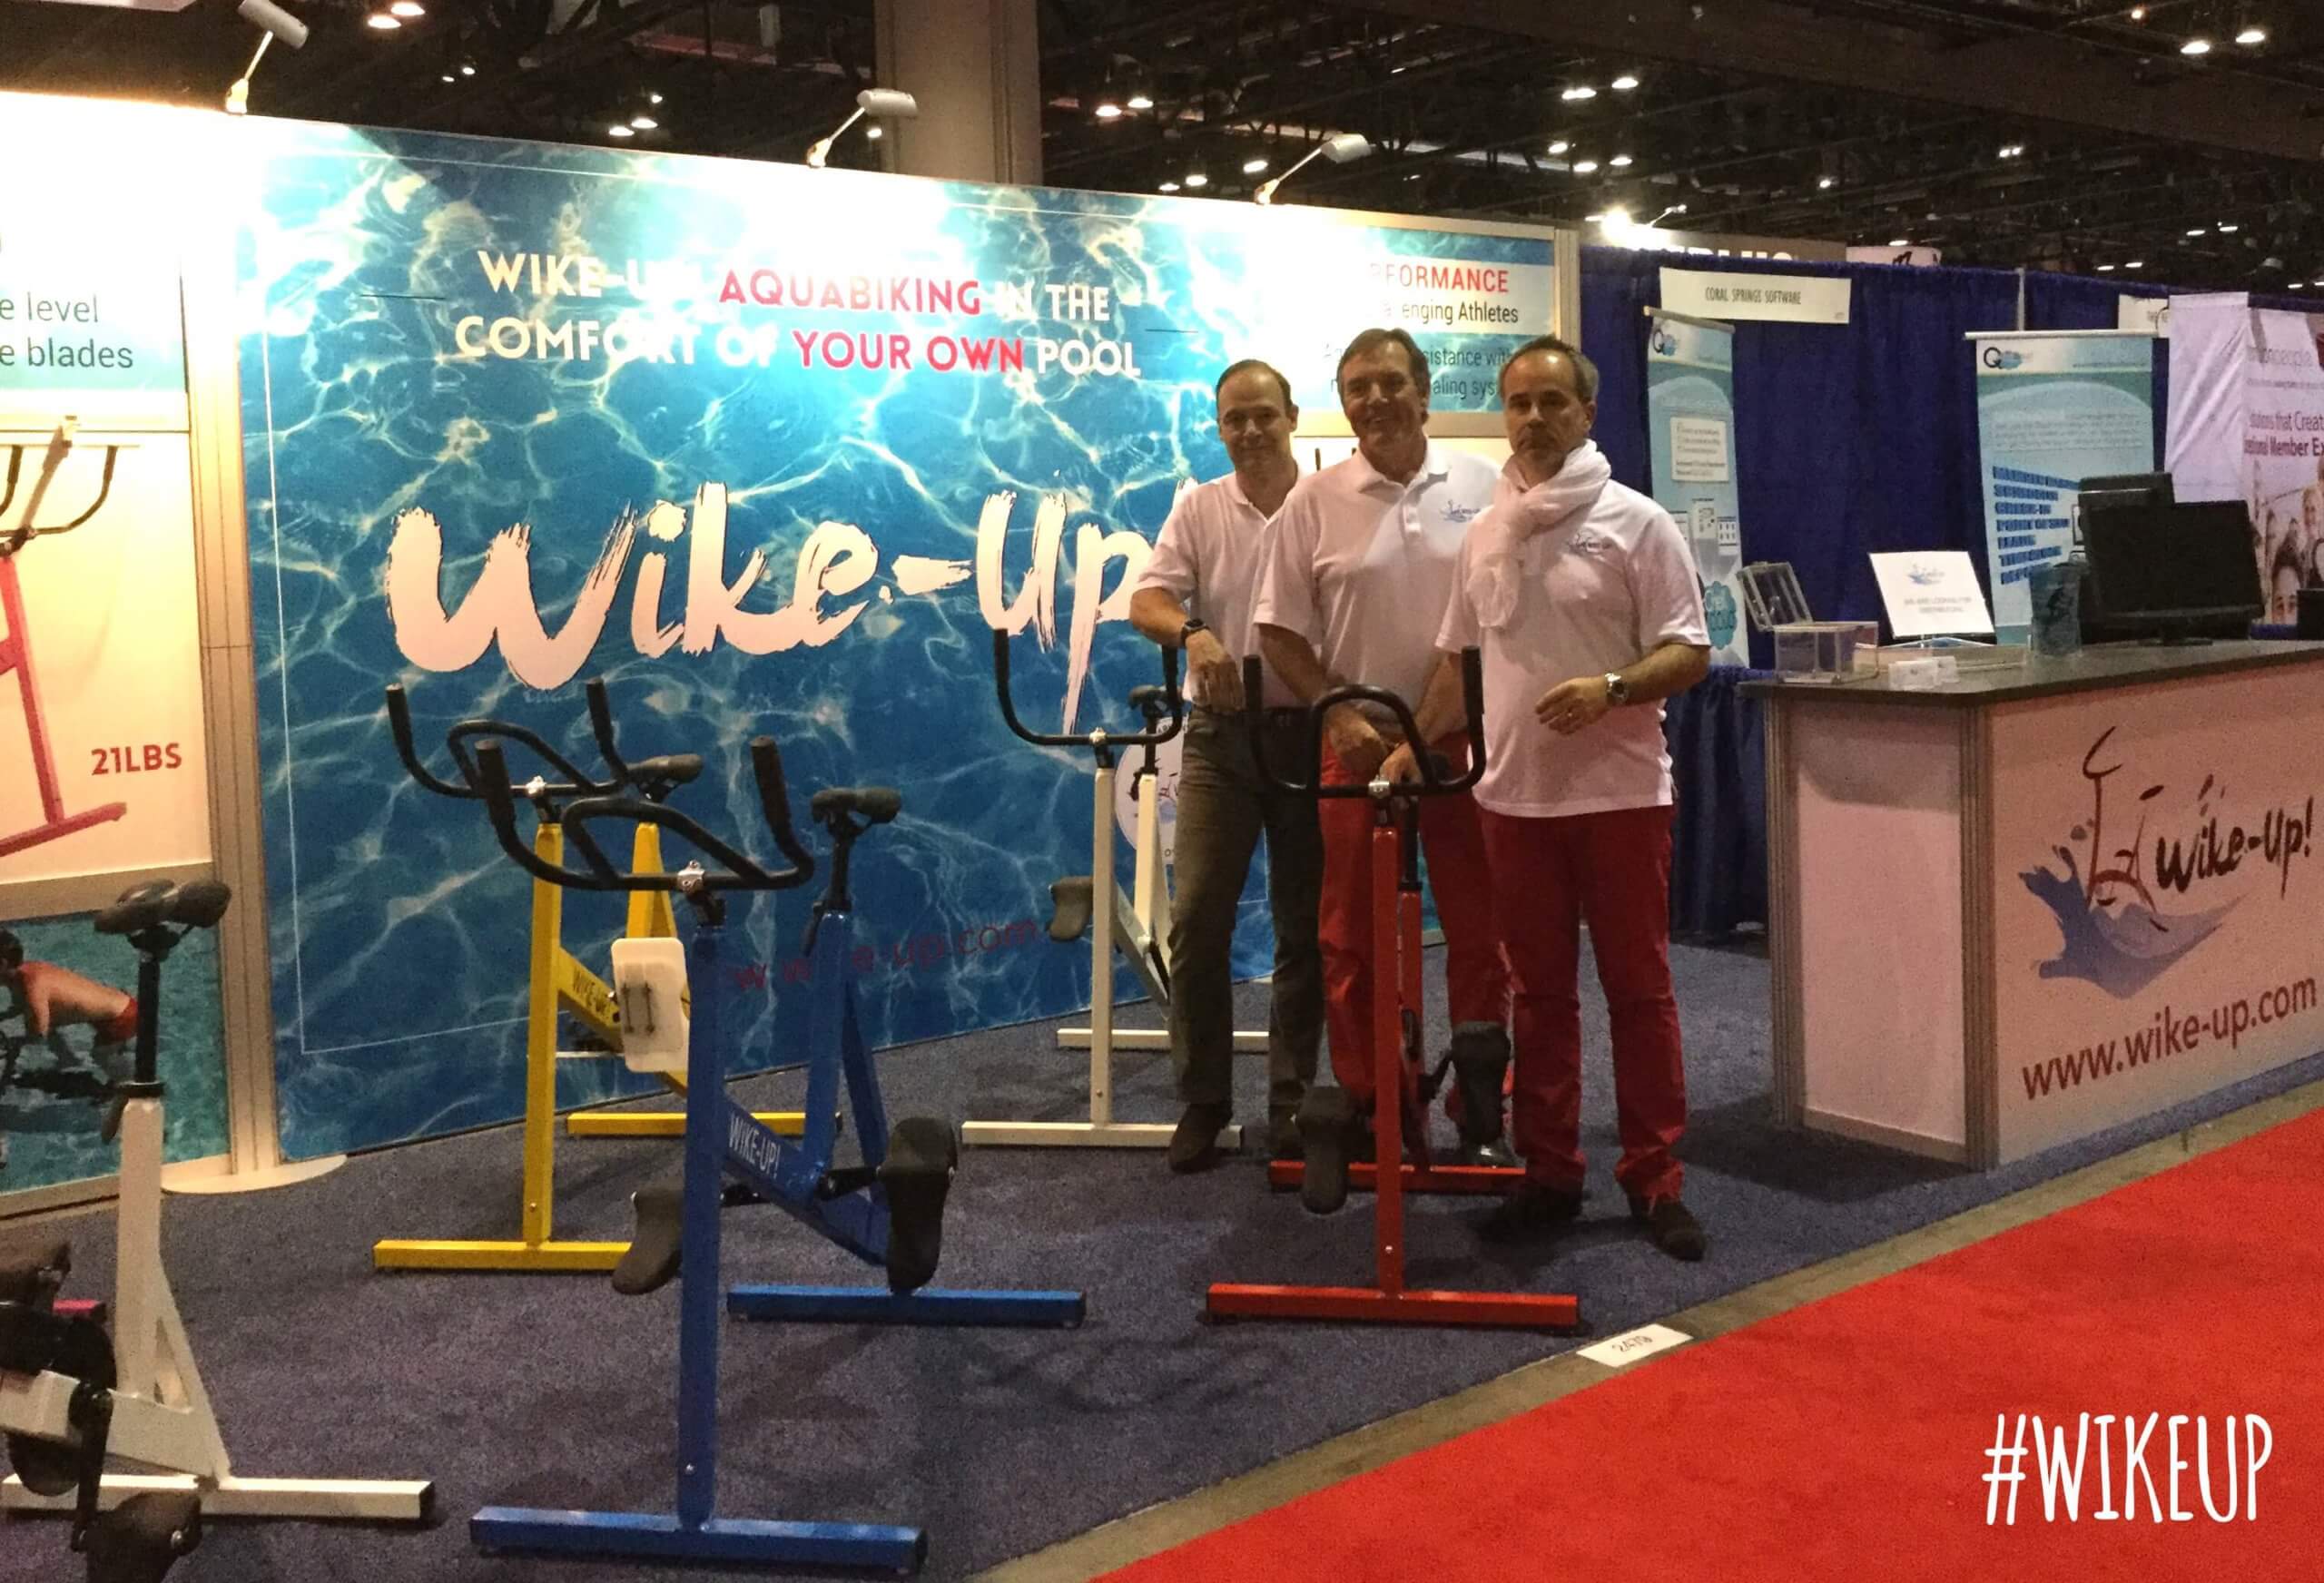 IHRSA 2016 and the Wike-Up! team.